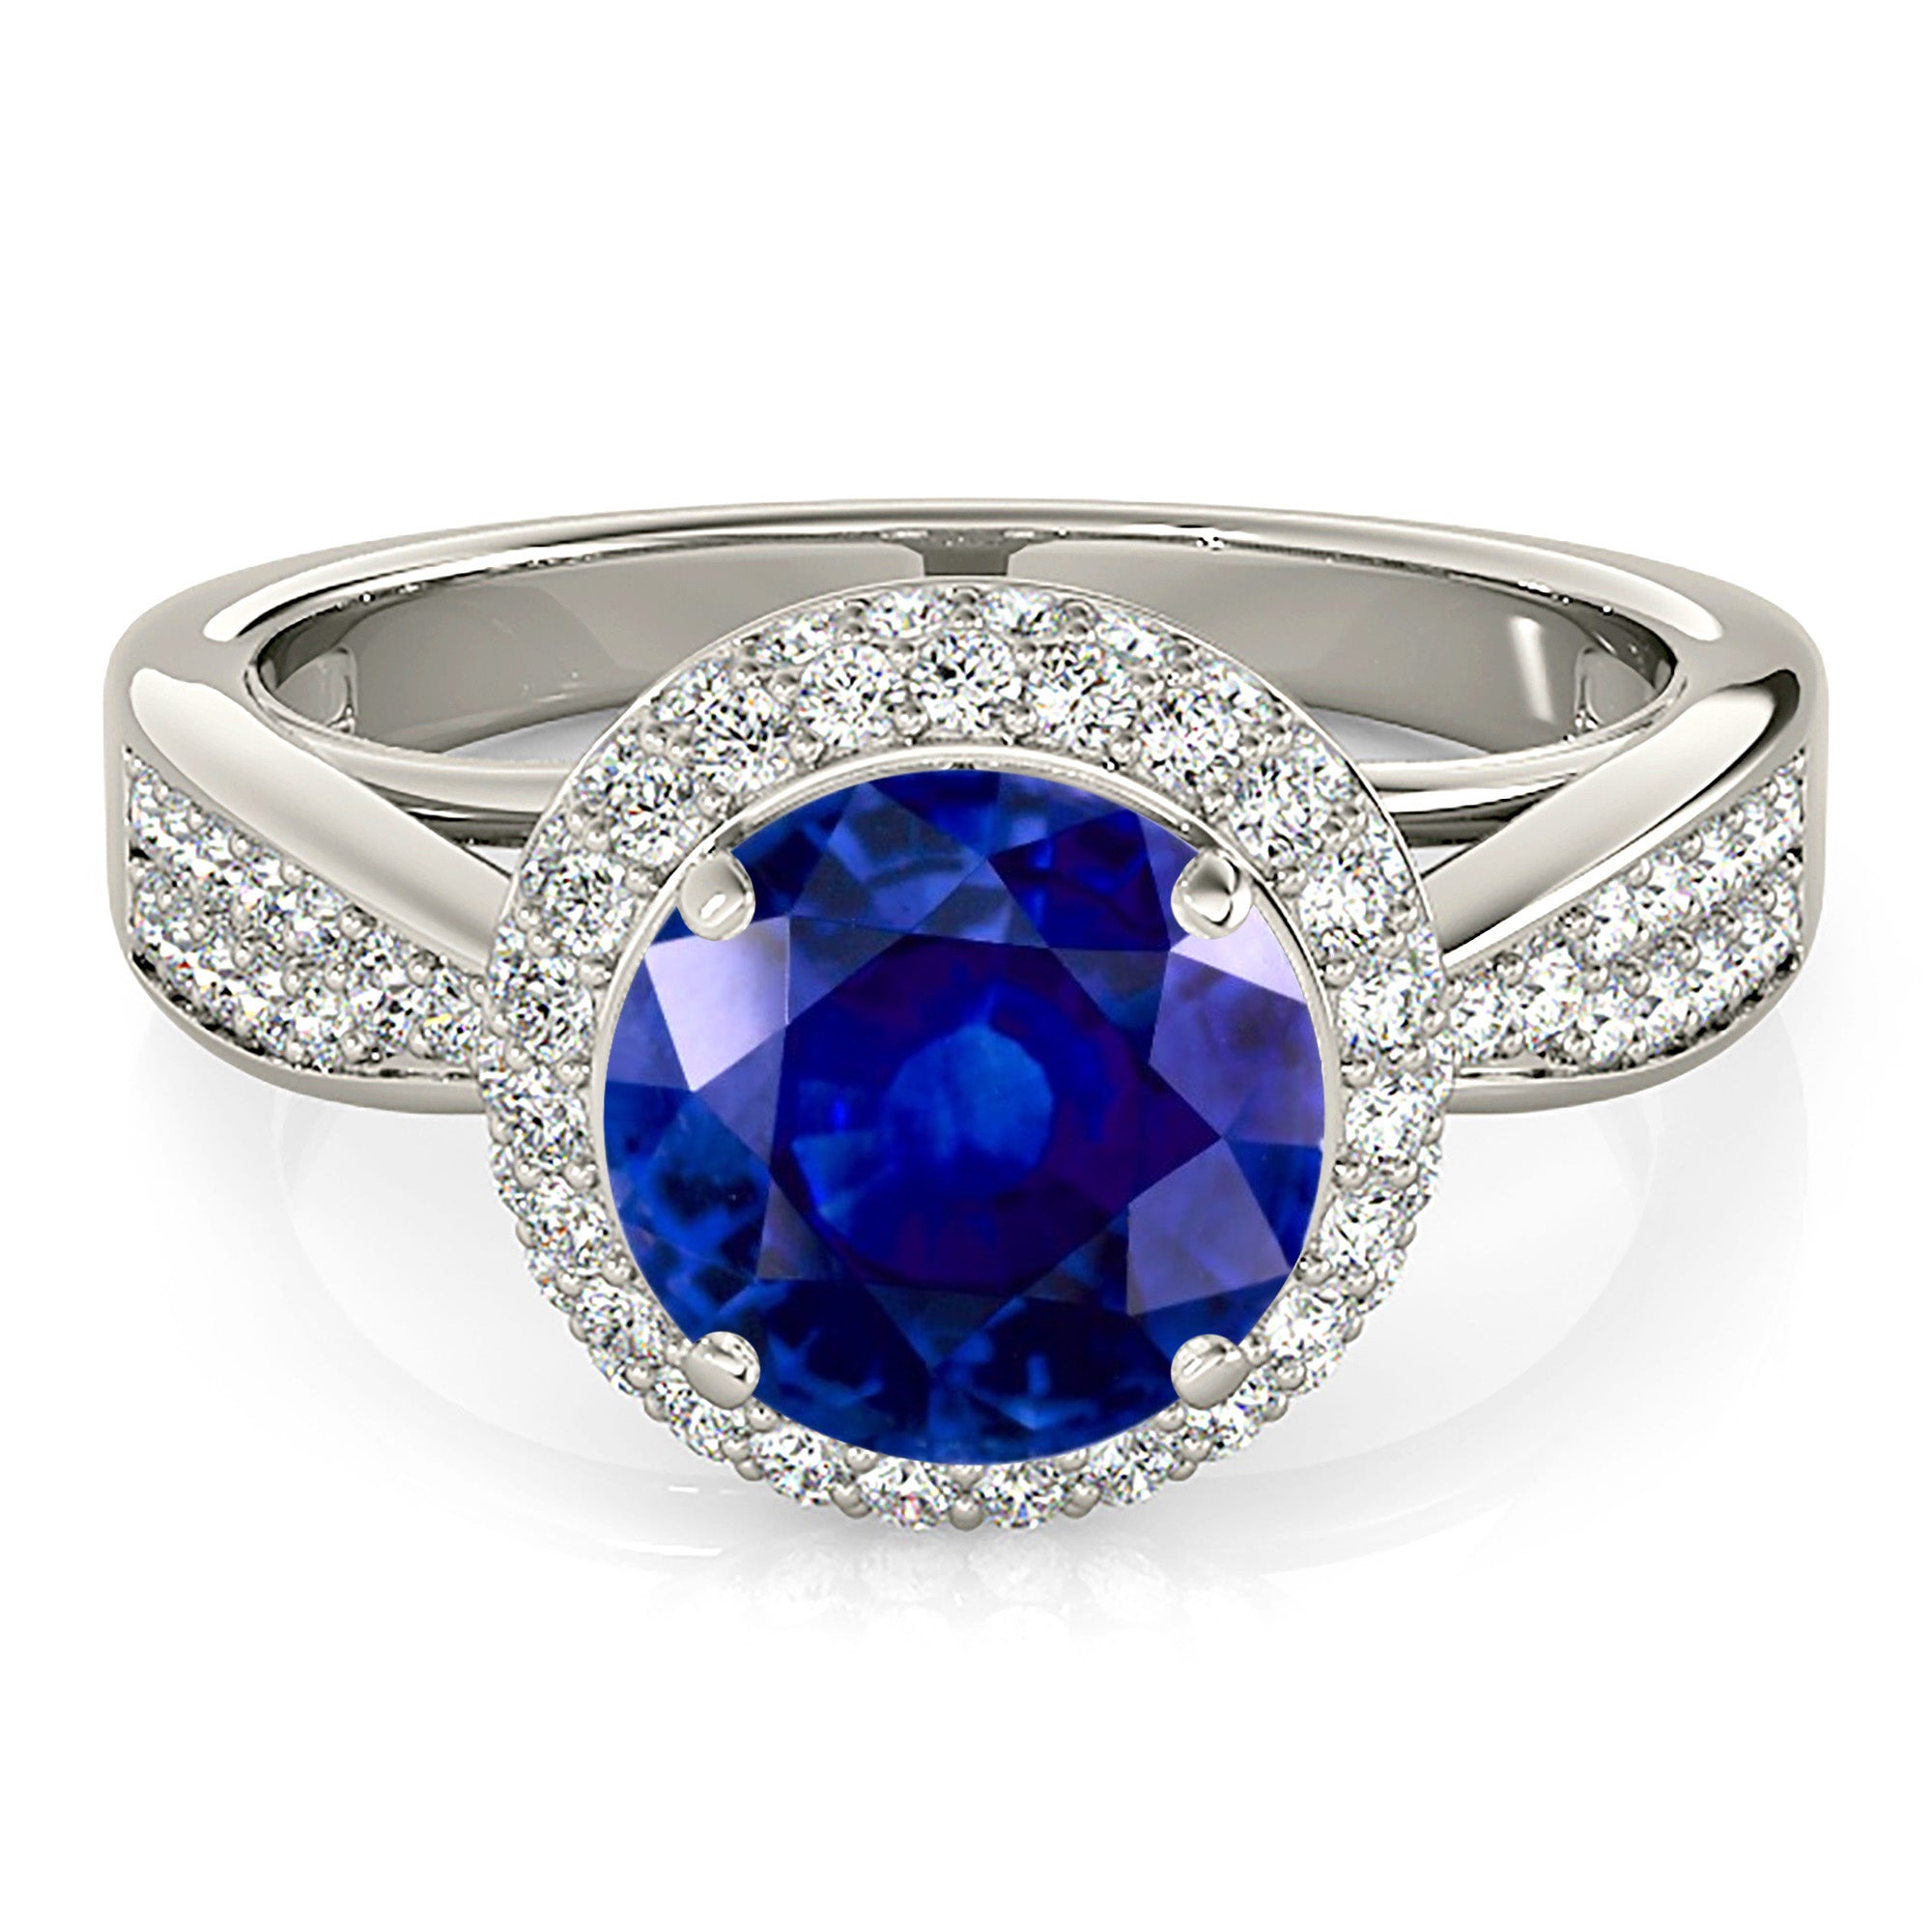 2.41 ct. Genuine Blue Sapphire Halo Ring With Pave Set Double Row 0.50 ctw. Side Diamonds-in 14K/18K White, Yellow, Rose Gold and Platinum - Christmas Jewelry Gift -VIRABYANI